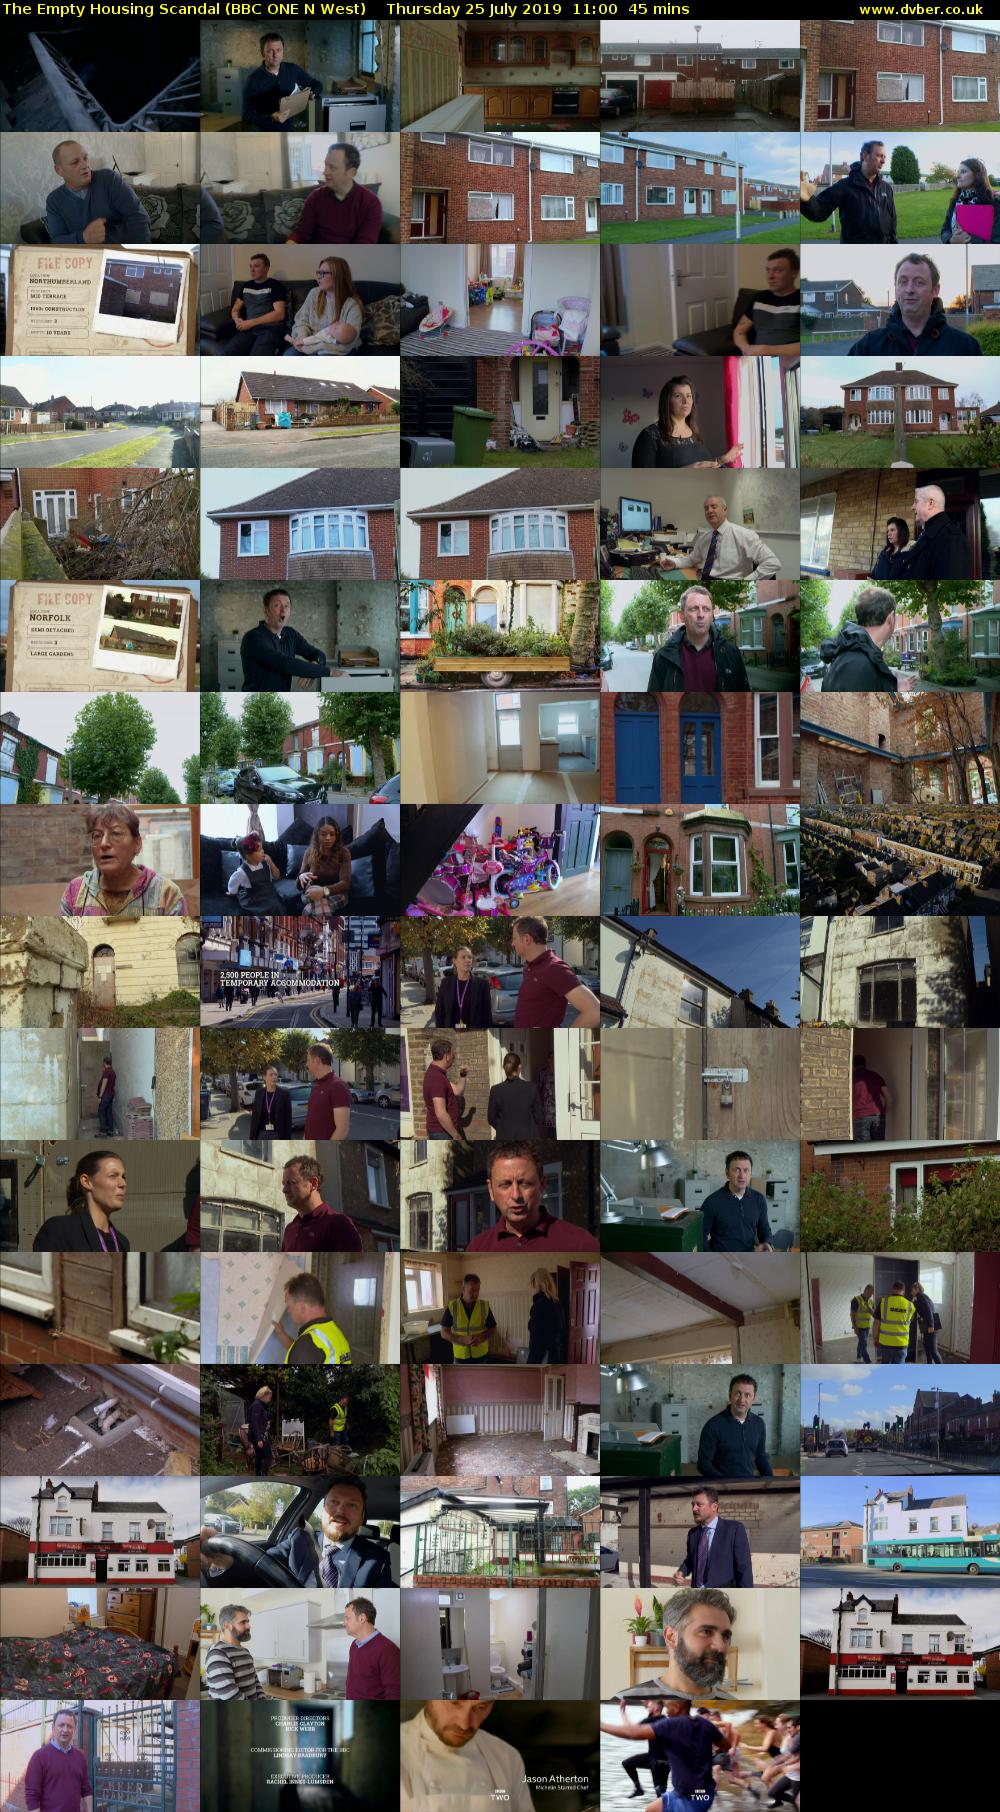 The Empty Housing Scandal (BBC ONE N West) Thursday 25 July 2019 11:00 - 11:45